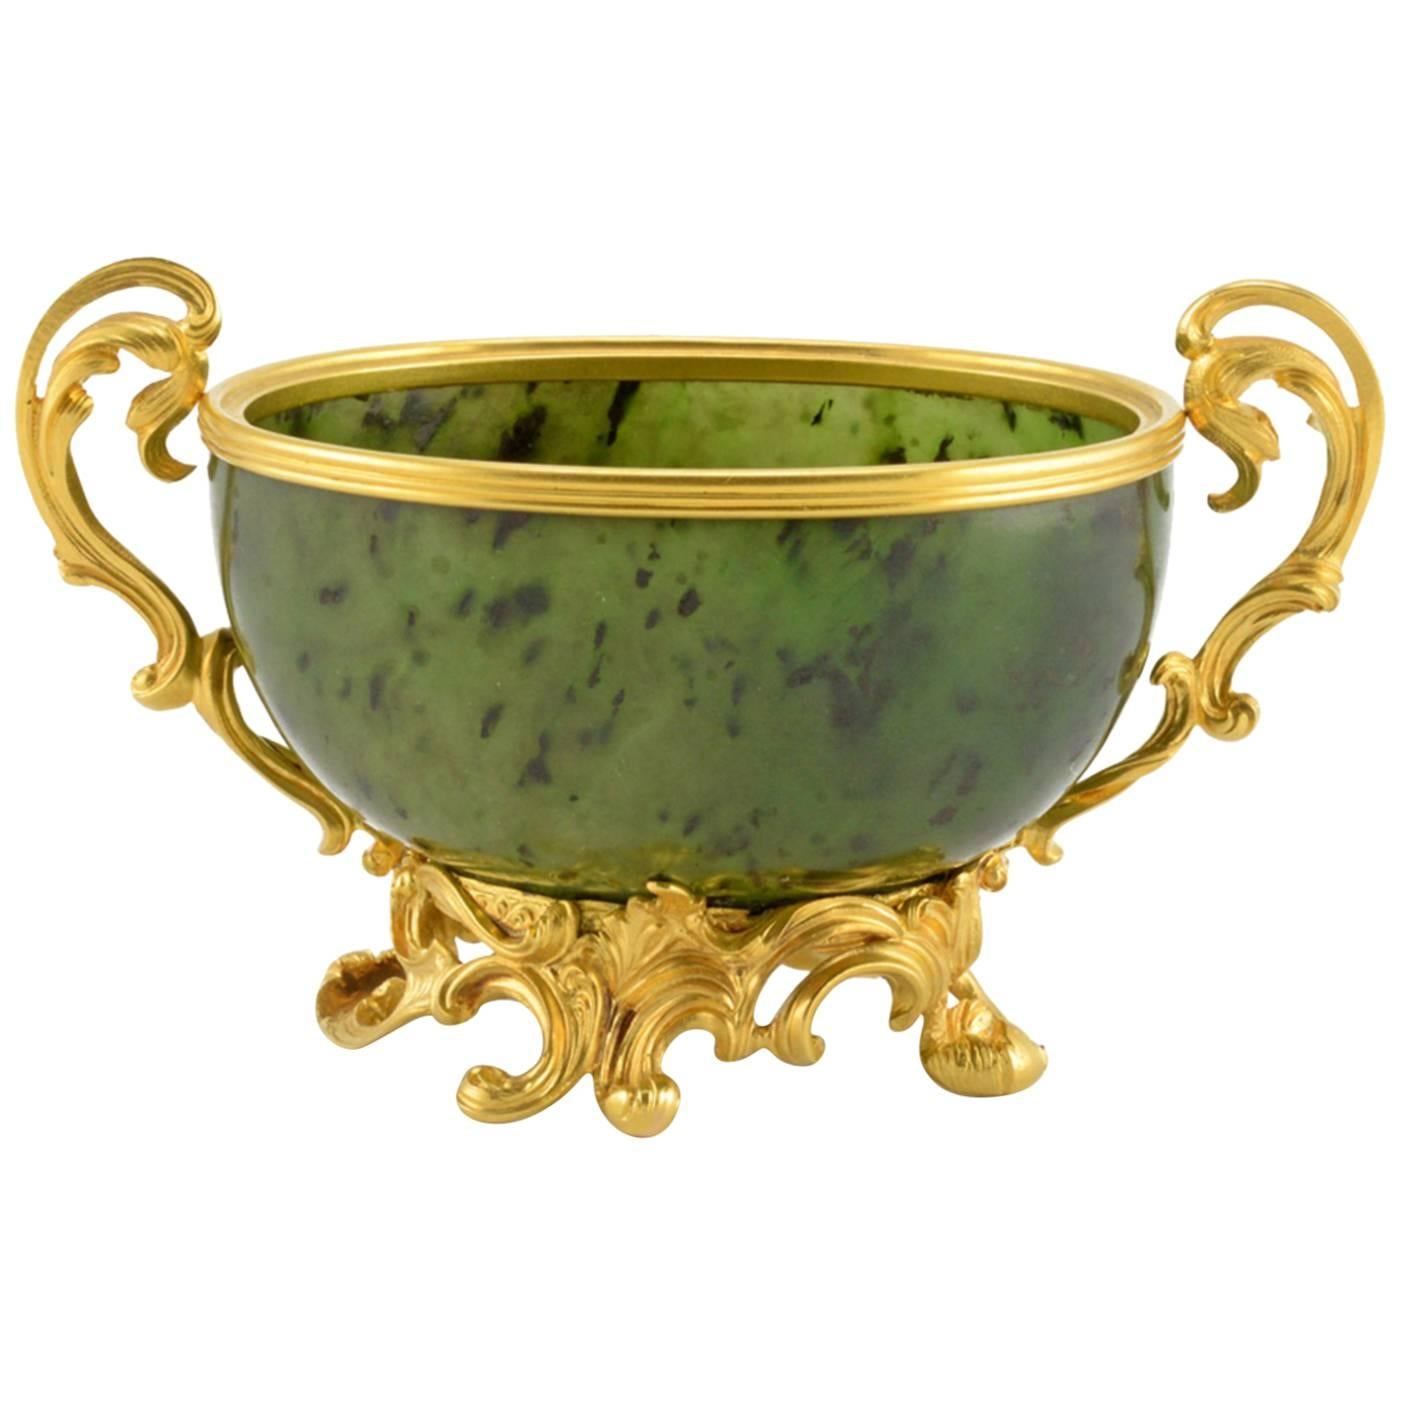 Antique Fabergé Imperial Russian Gold and Carved Nephrite Bowl